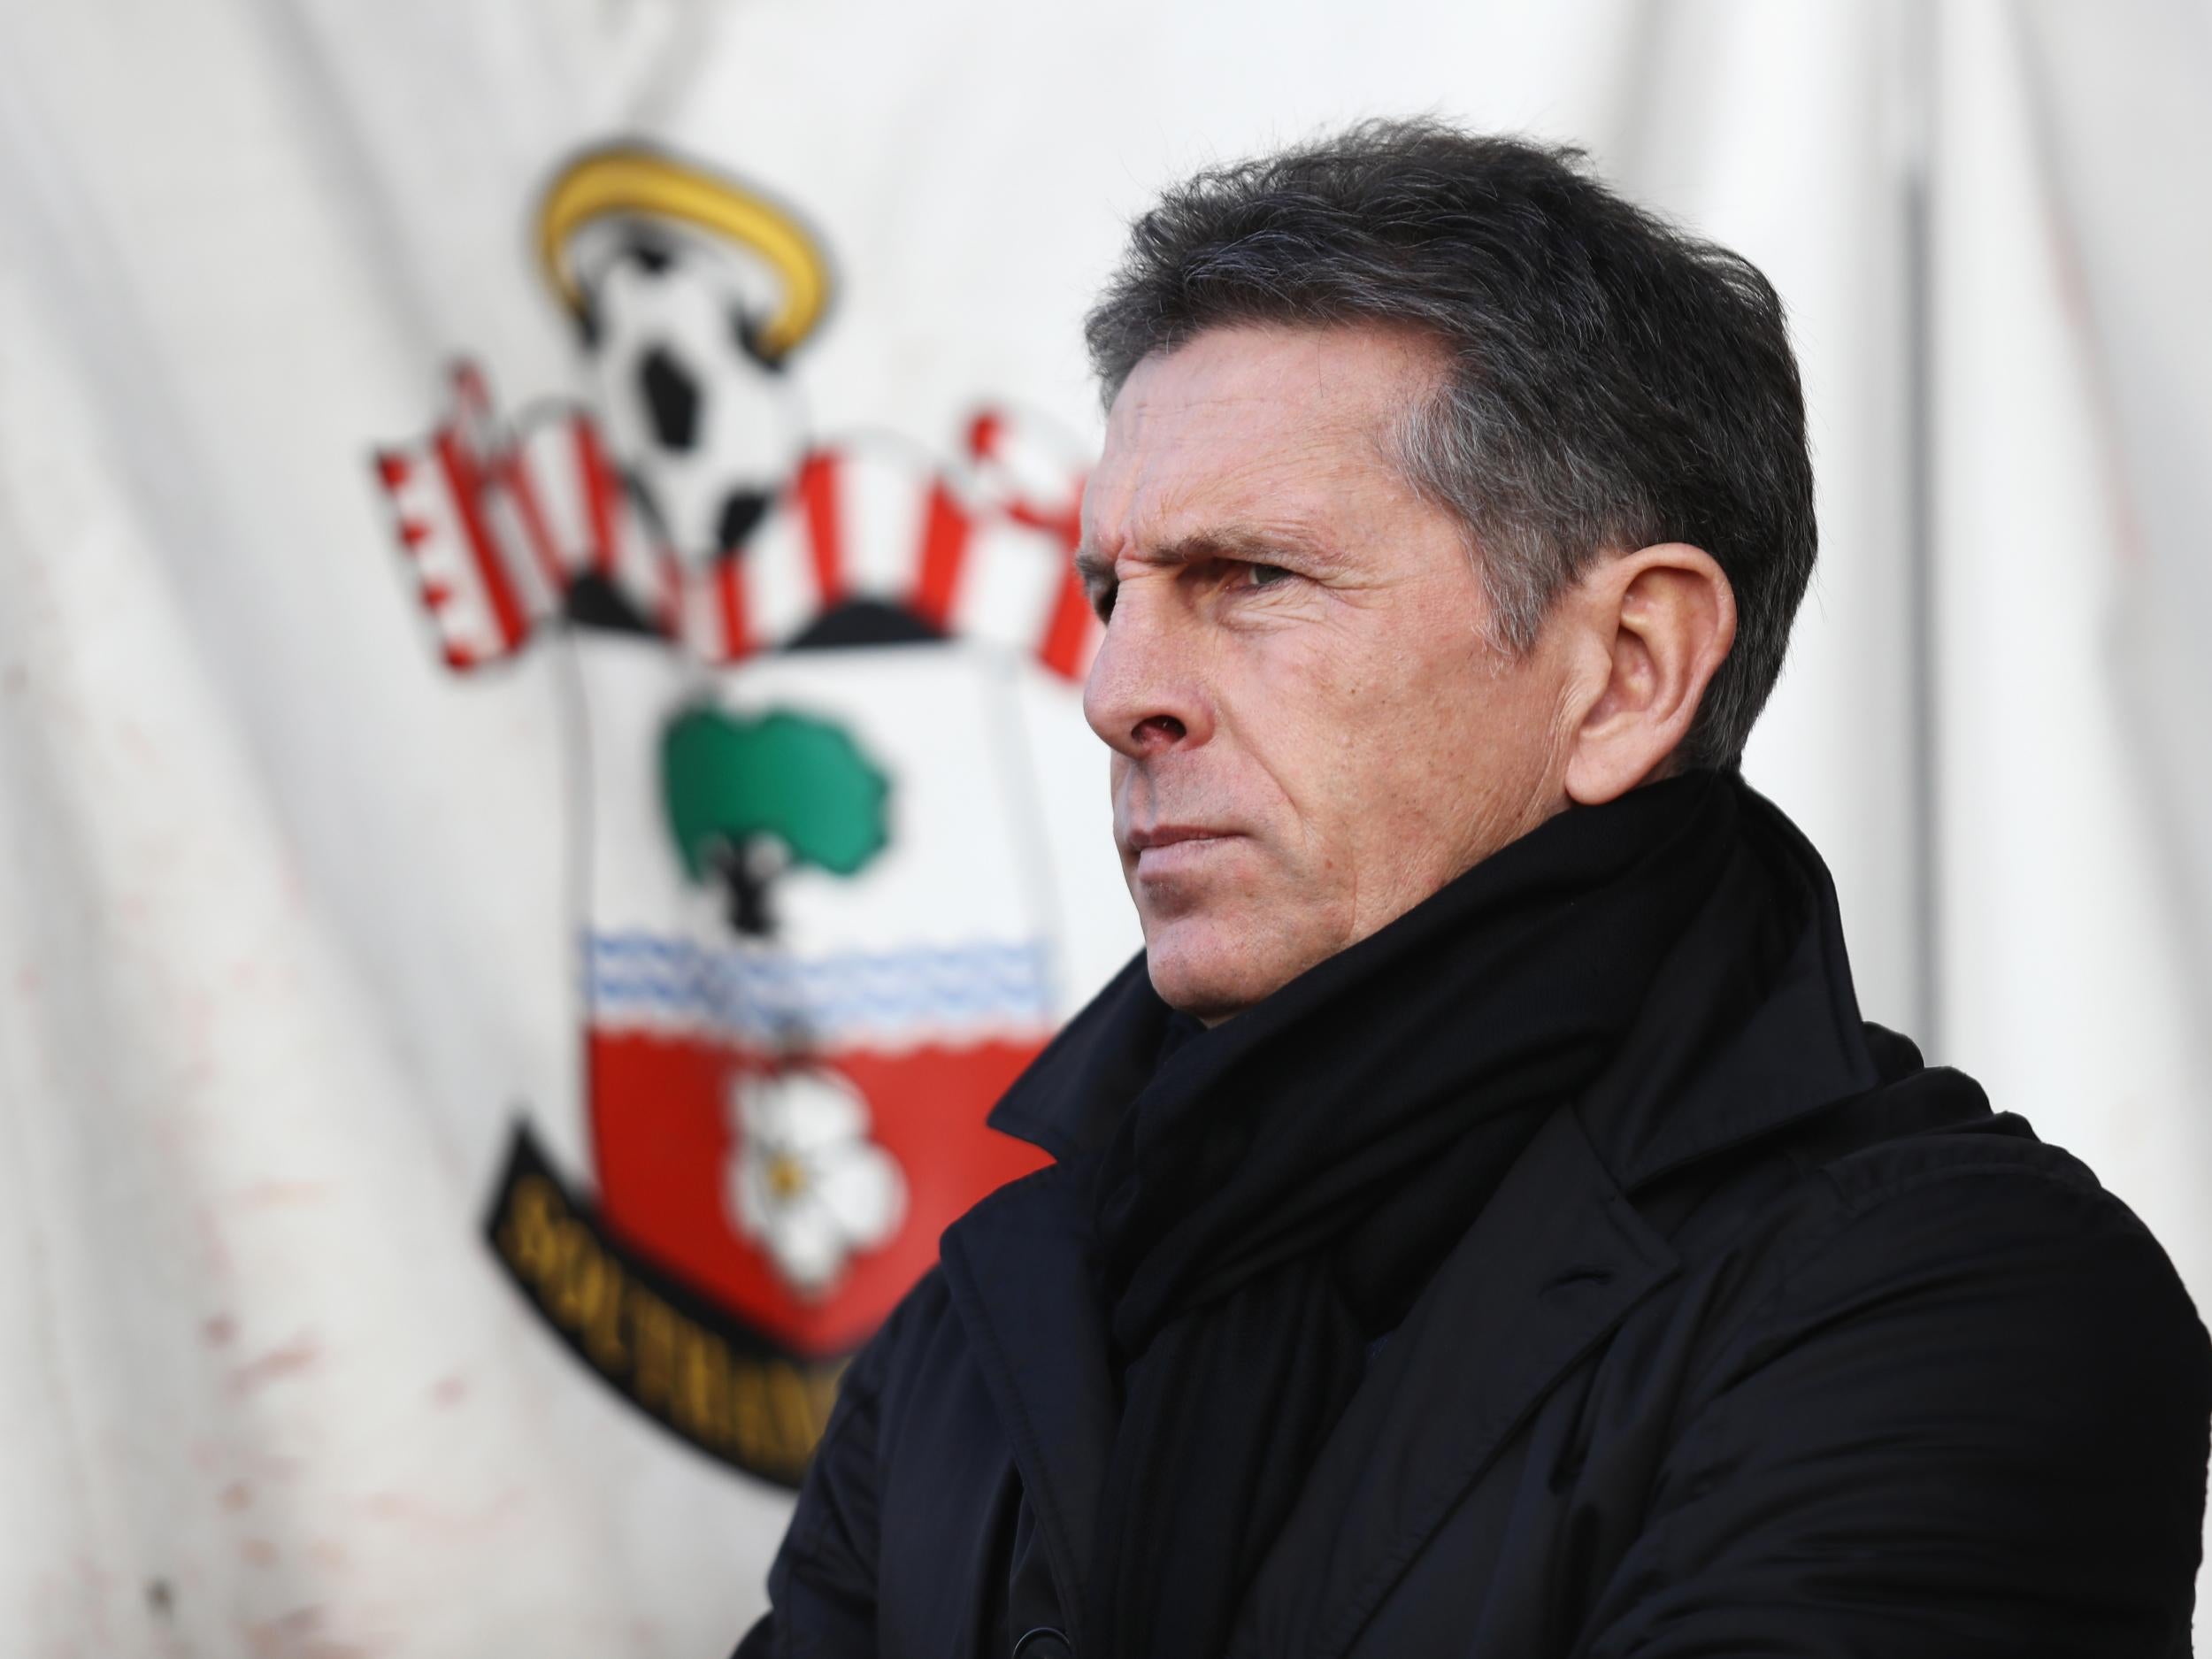 Puel hopes he can lead the club to their first major honour since 1976